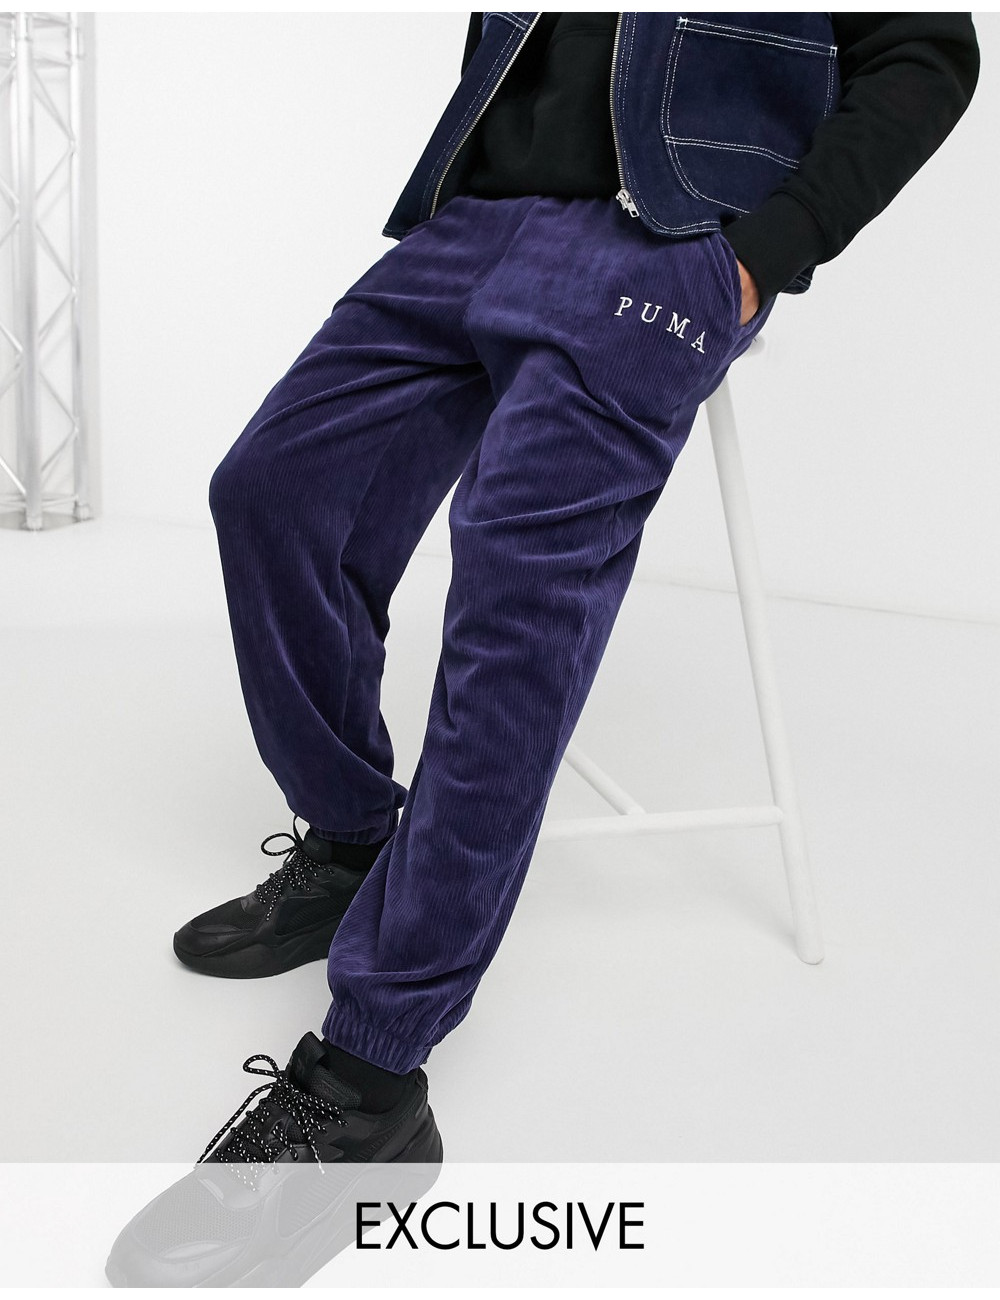 Puma Cord joggers in navy...